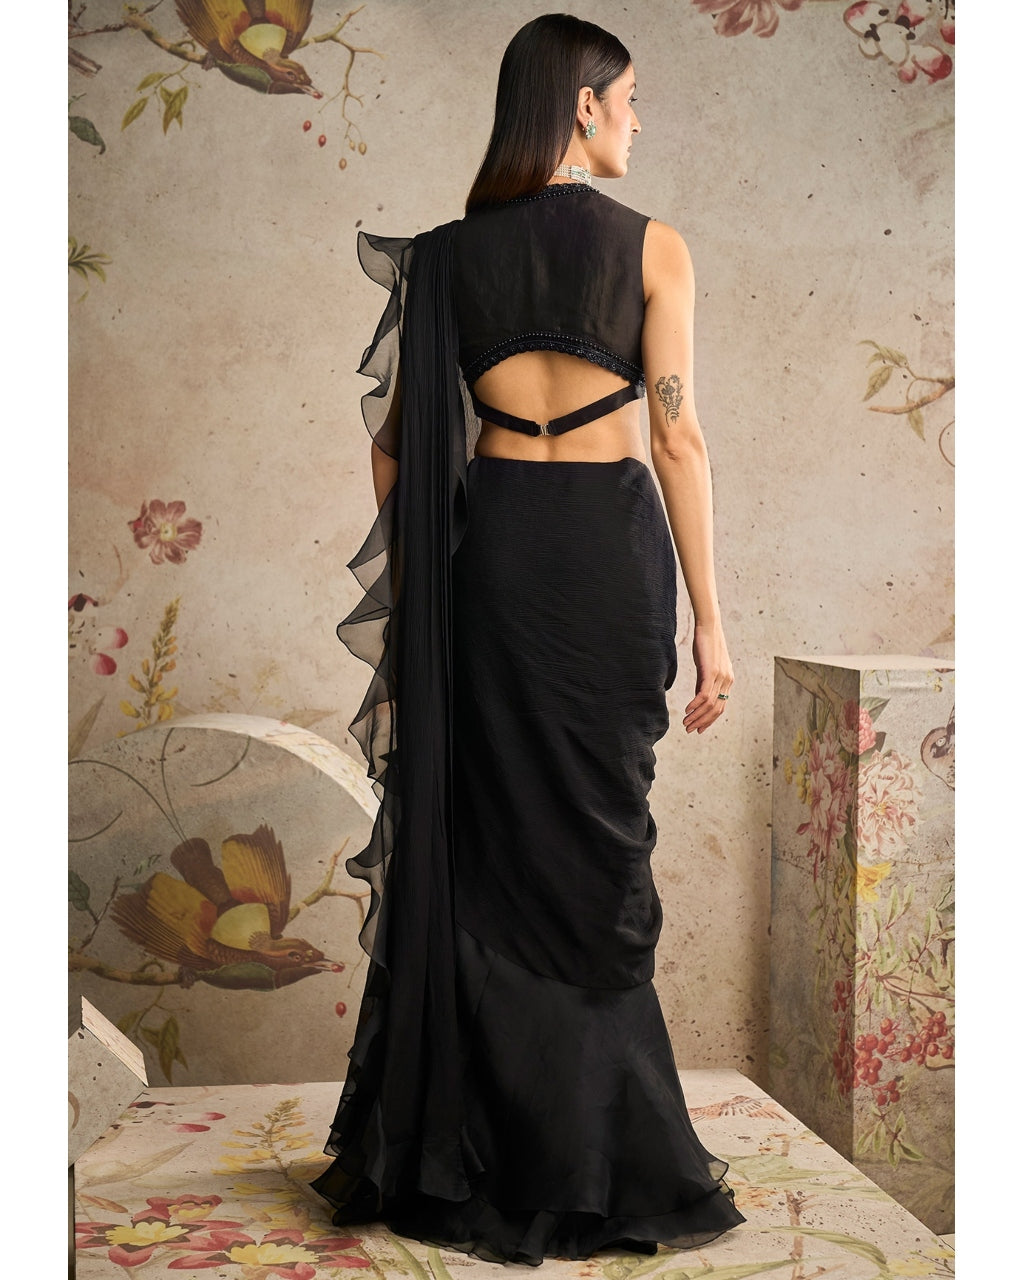 Buy Grey Chiffon Embroidered Folklore Line V Neck Saree With